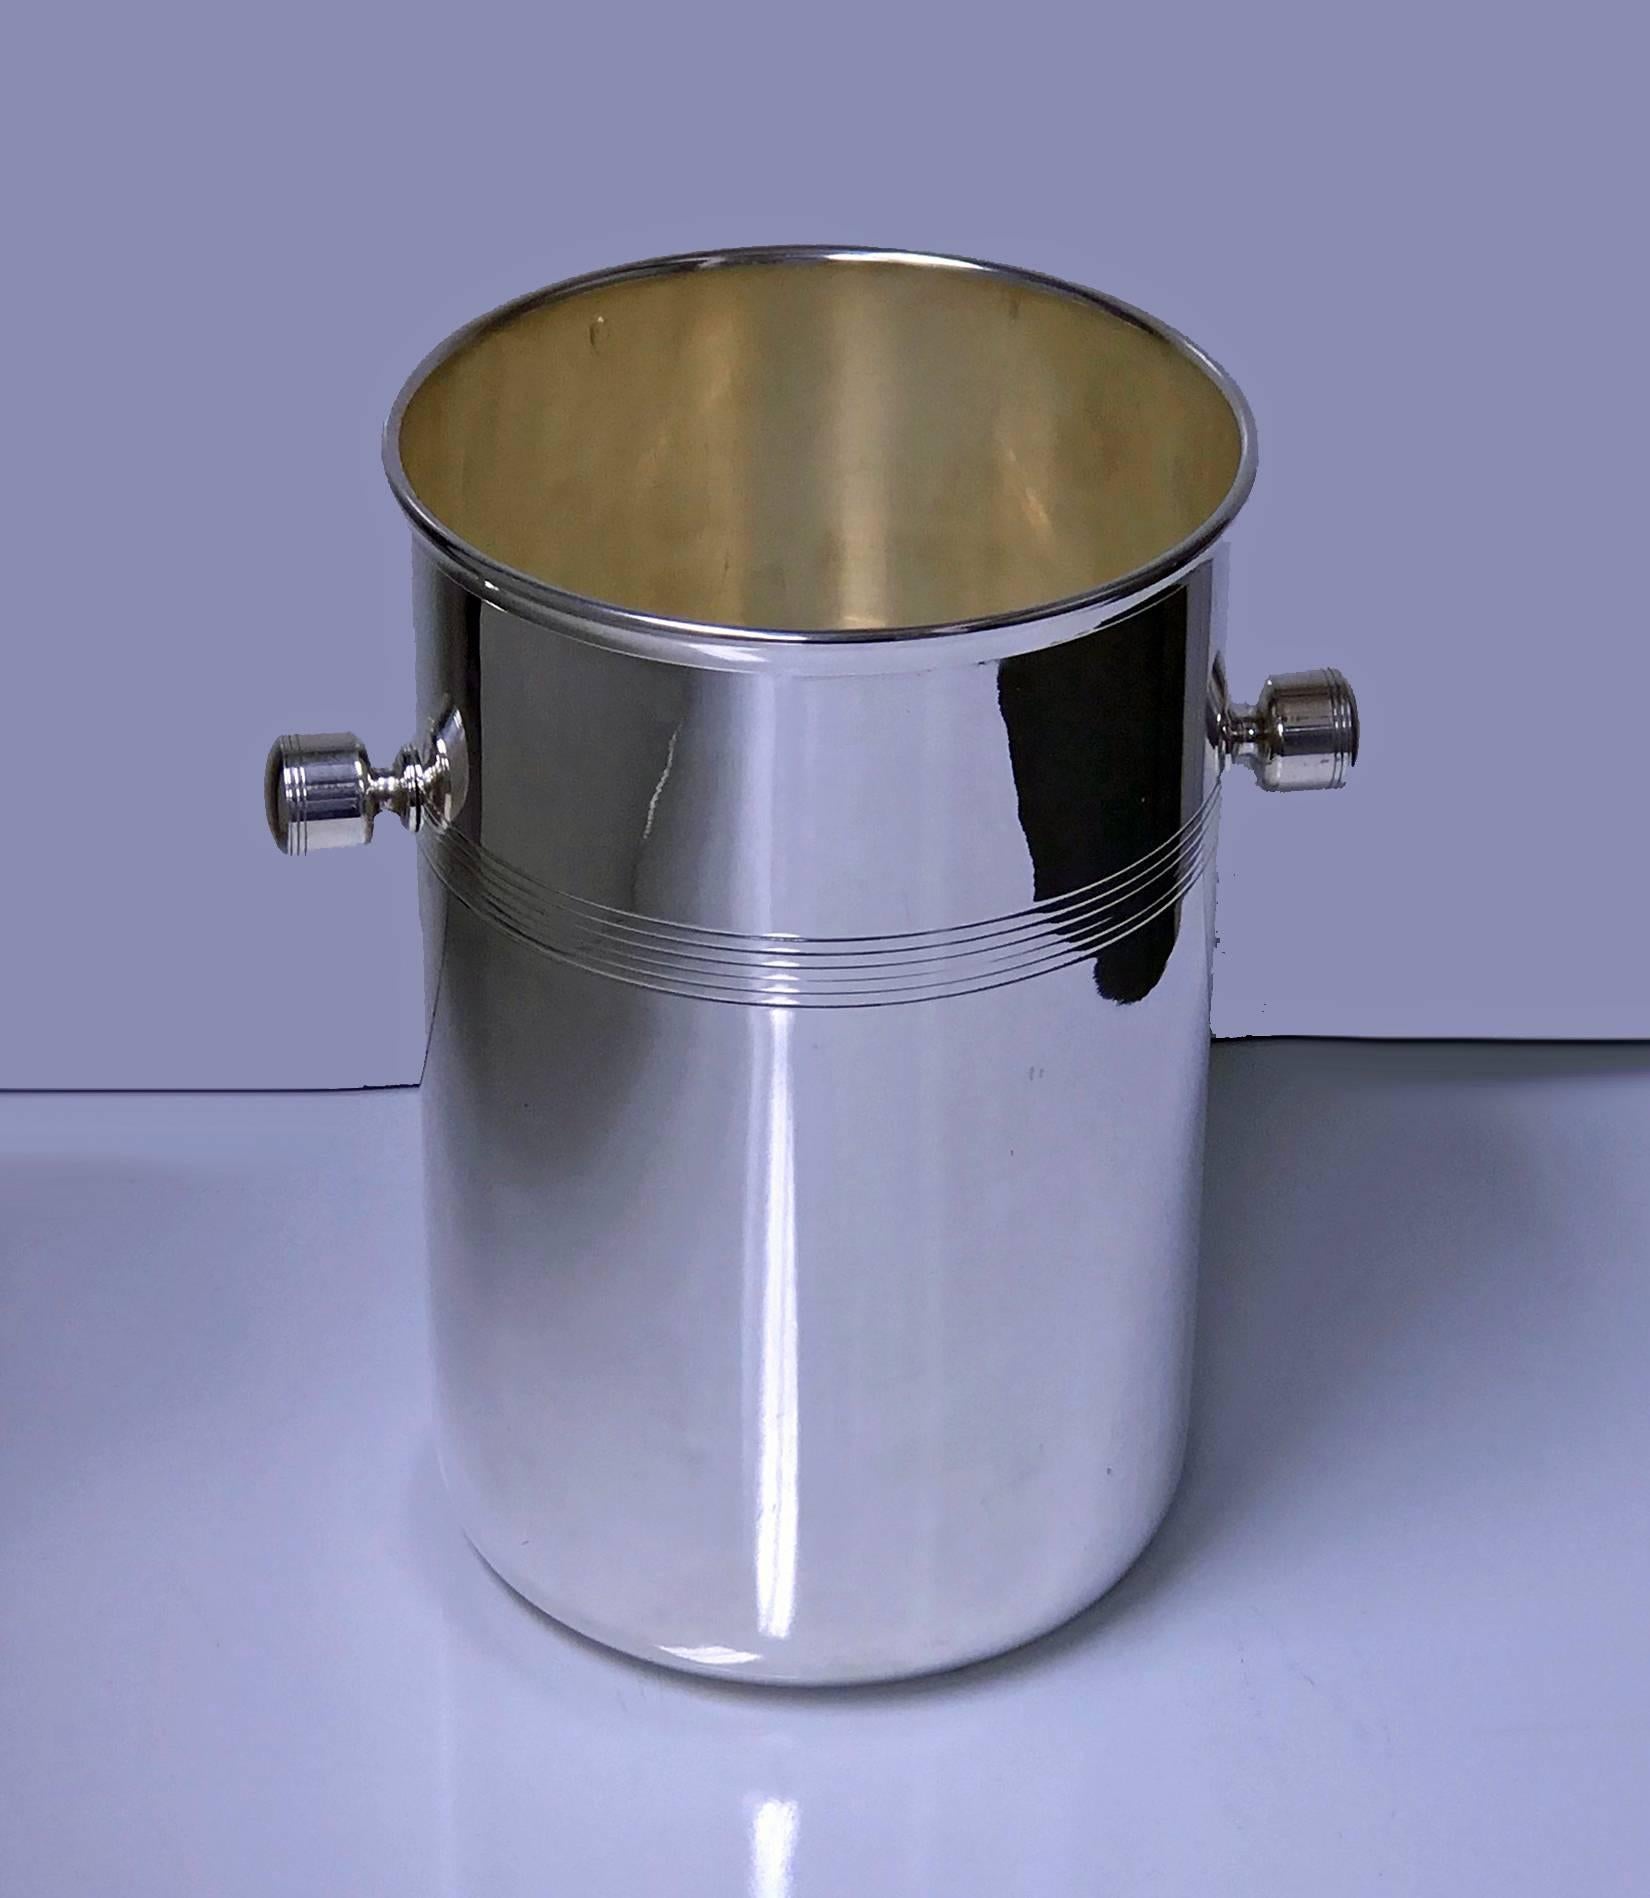 Art Deco French Modernist silver plate wine cooler, circa 1935, by St. Hilaire. The cooler of cylindrical form, plain polished body with groove upper central surround, handles conforming in design. Marks for St Hilaire. Measures: Height: 8.00